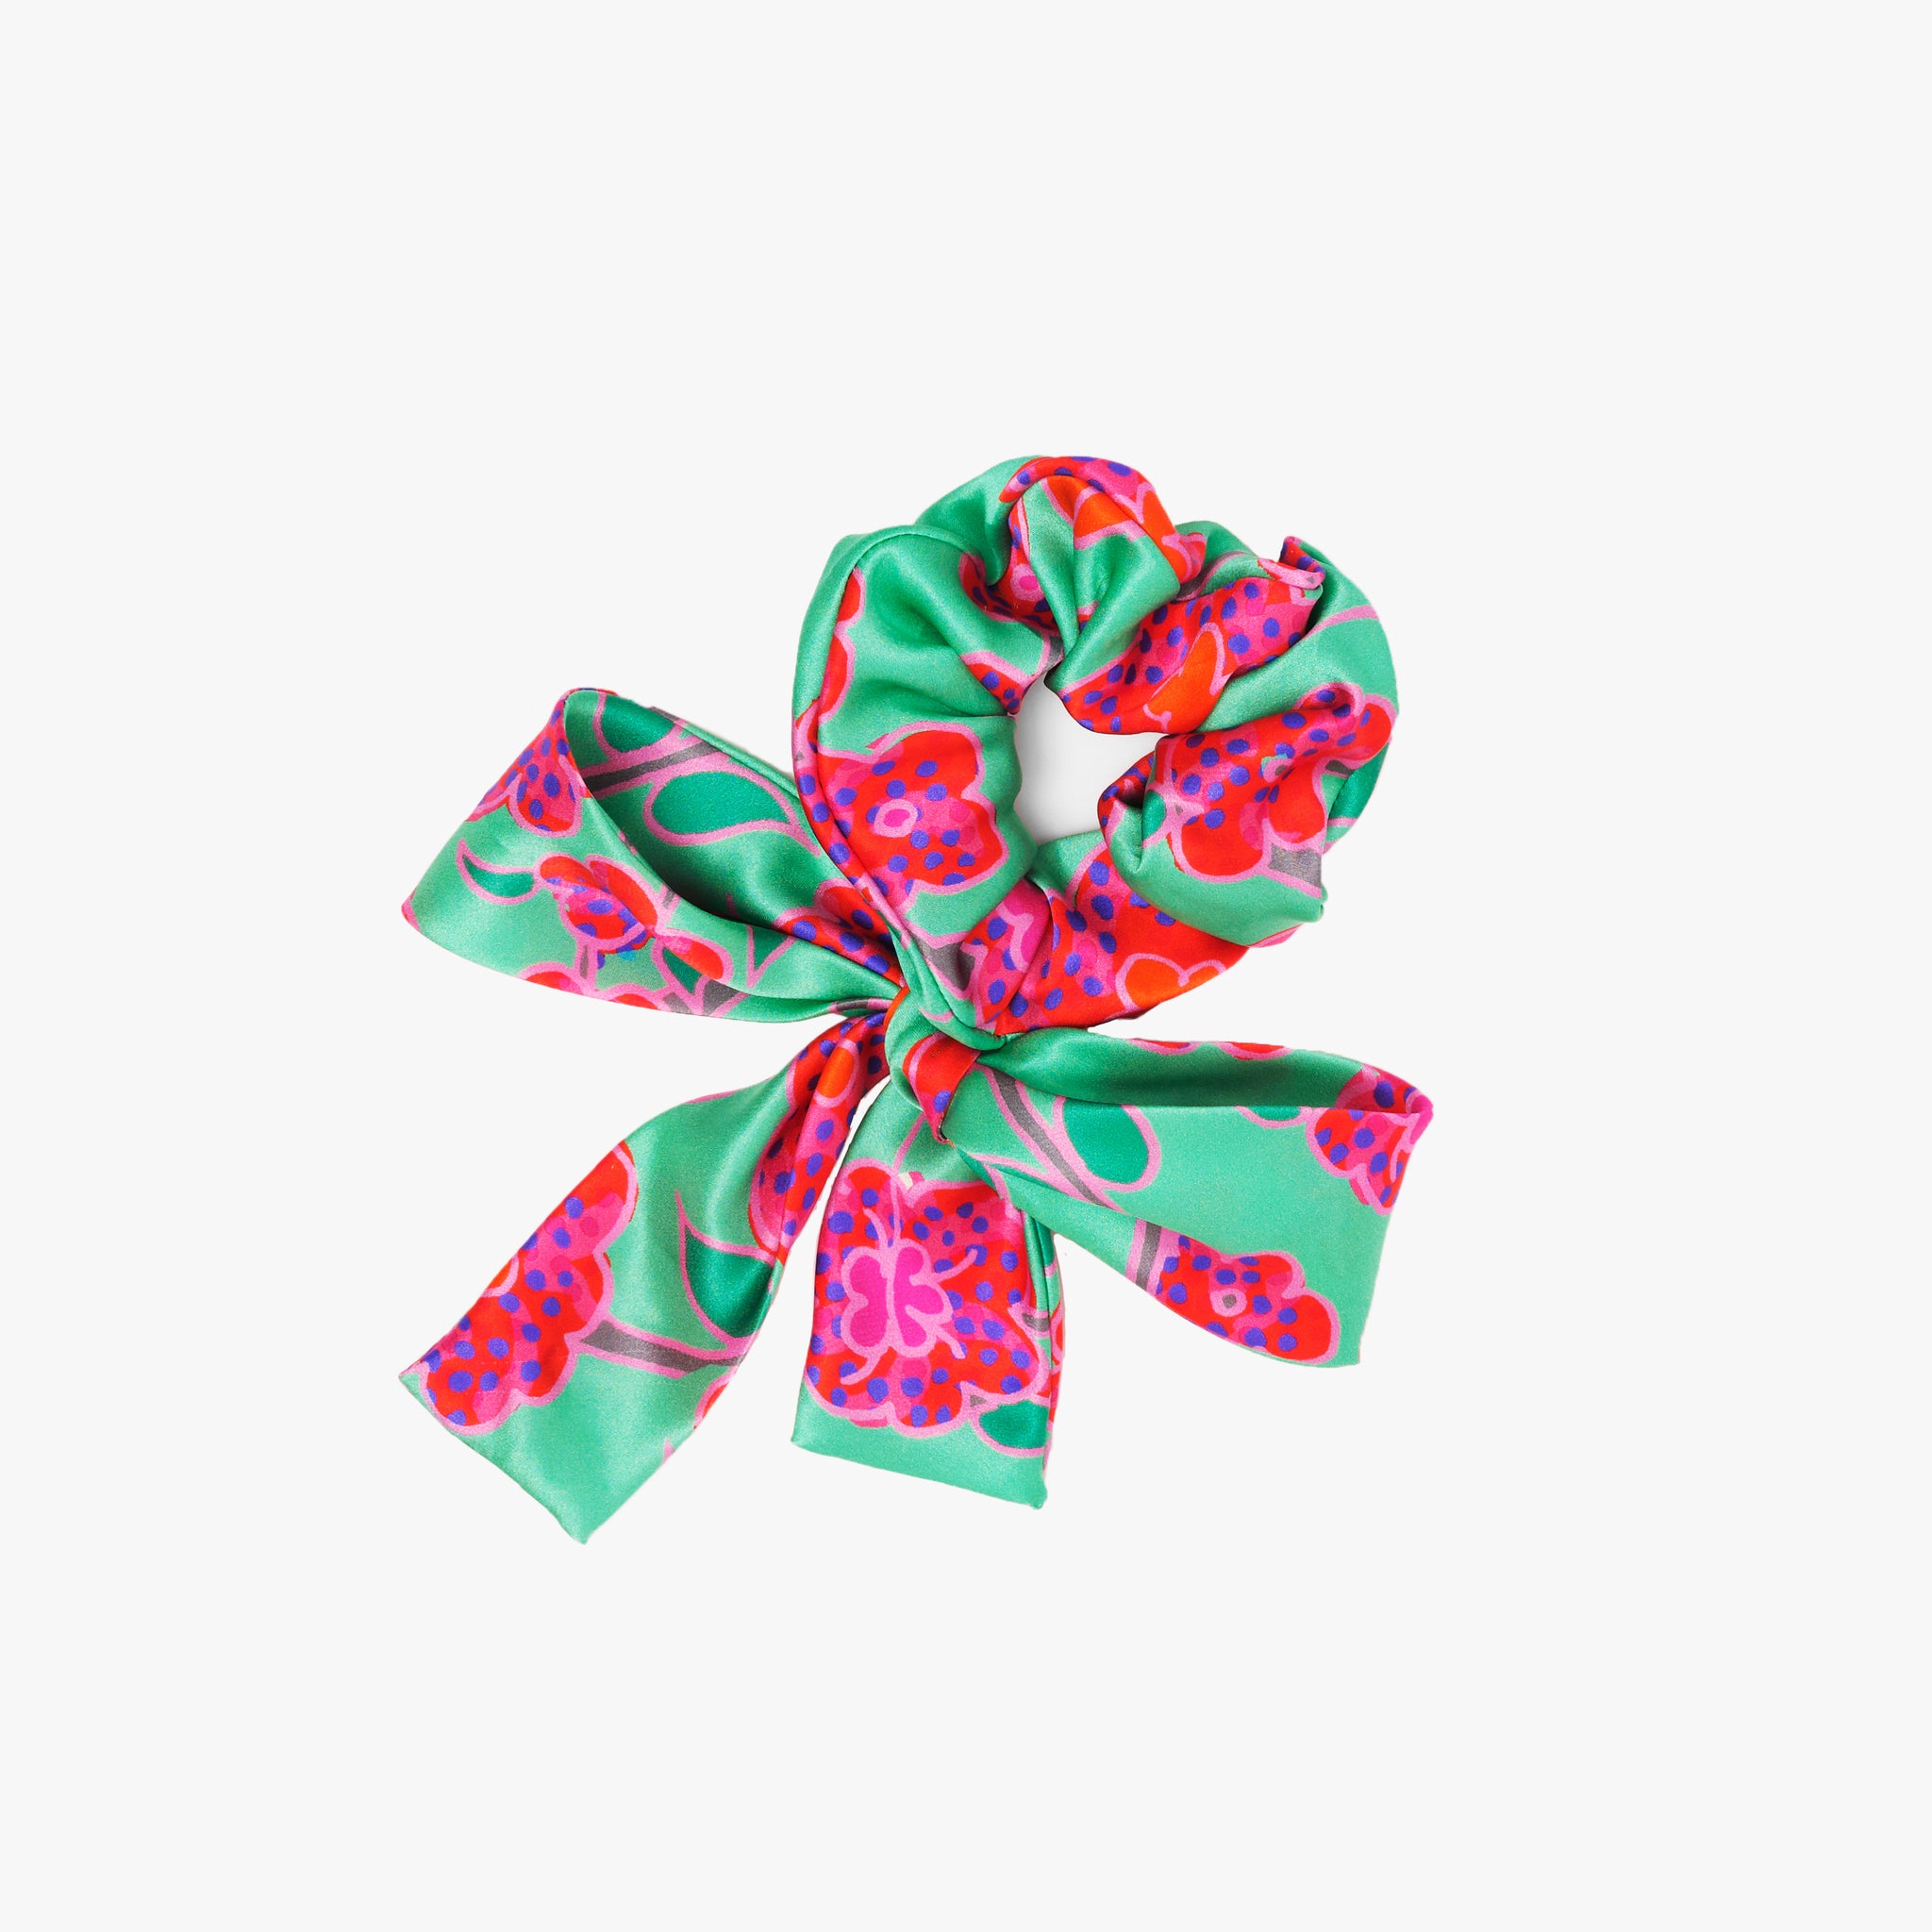 Srunchie with a bow featuring Crimson Rose hand drawn flower print from the Island Dreams collection in green, red, pink, orange and purple.